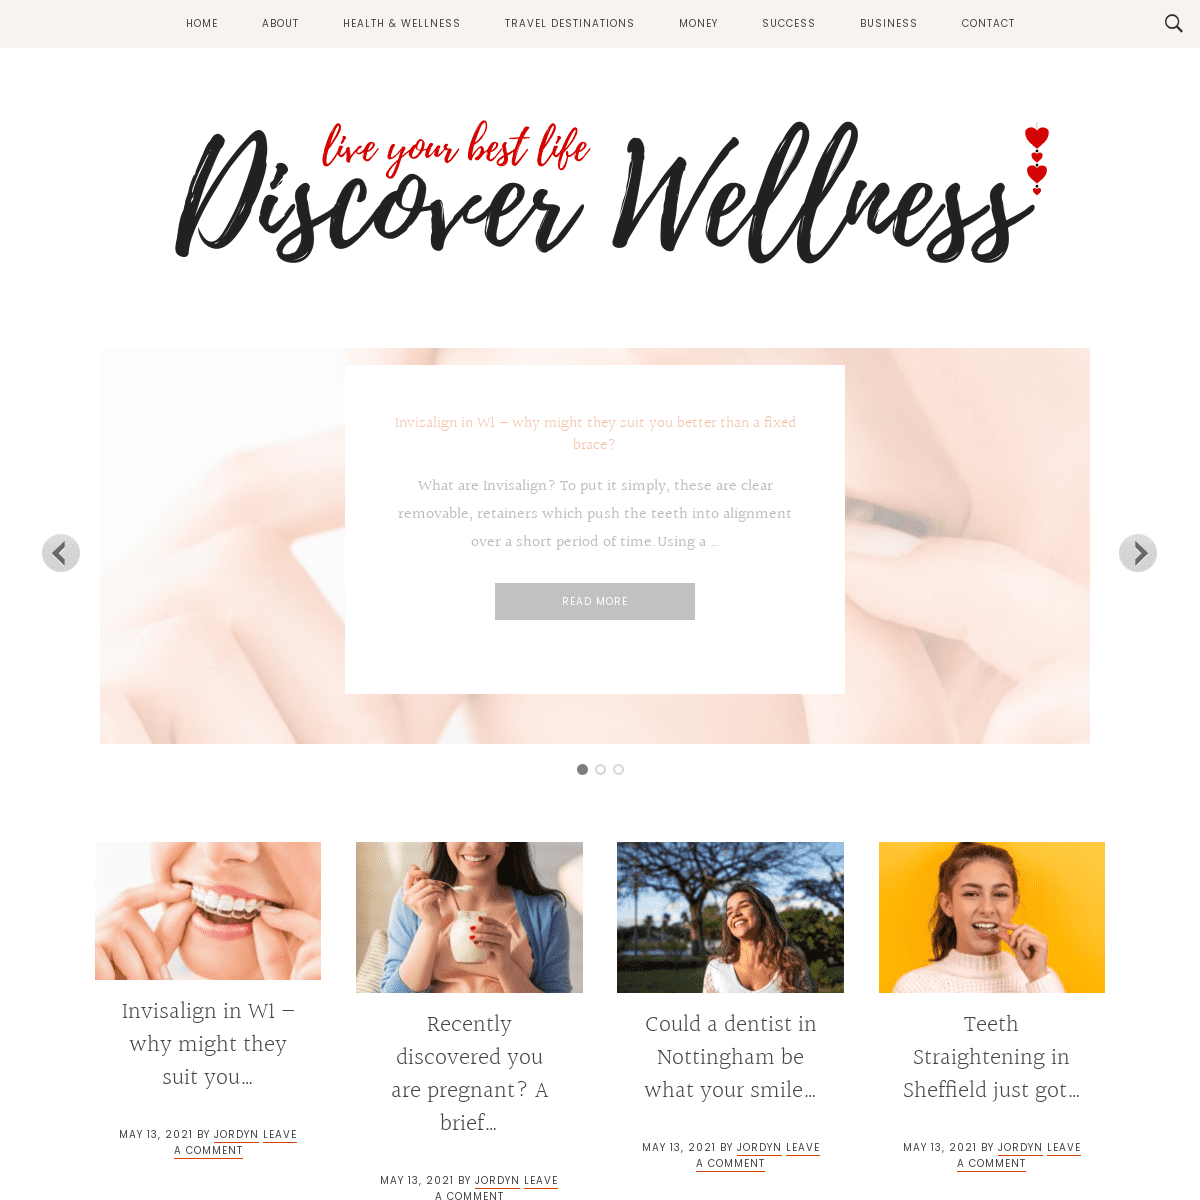 A complete backup of https://discoverwellnesscoaching.com